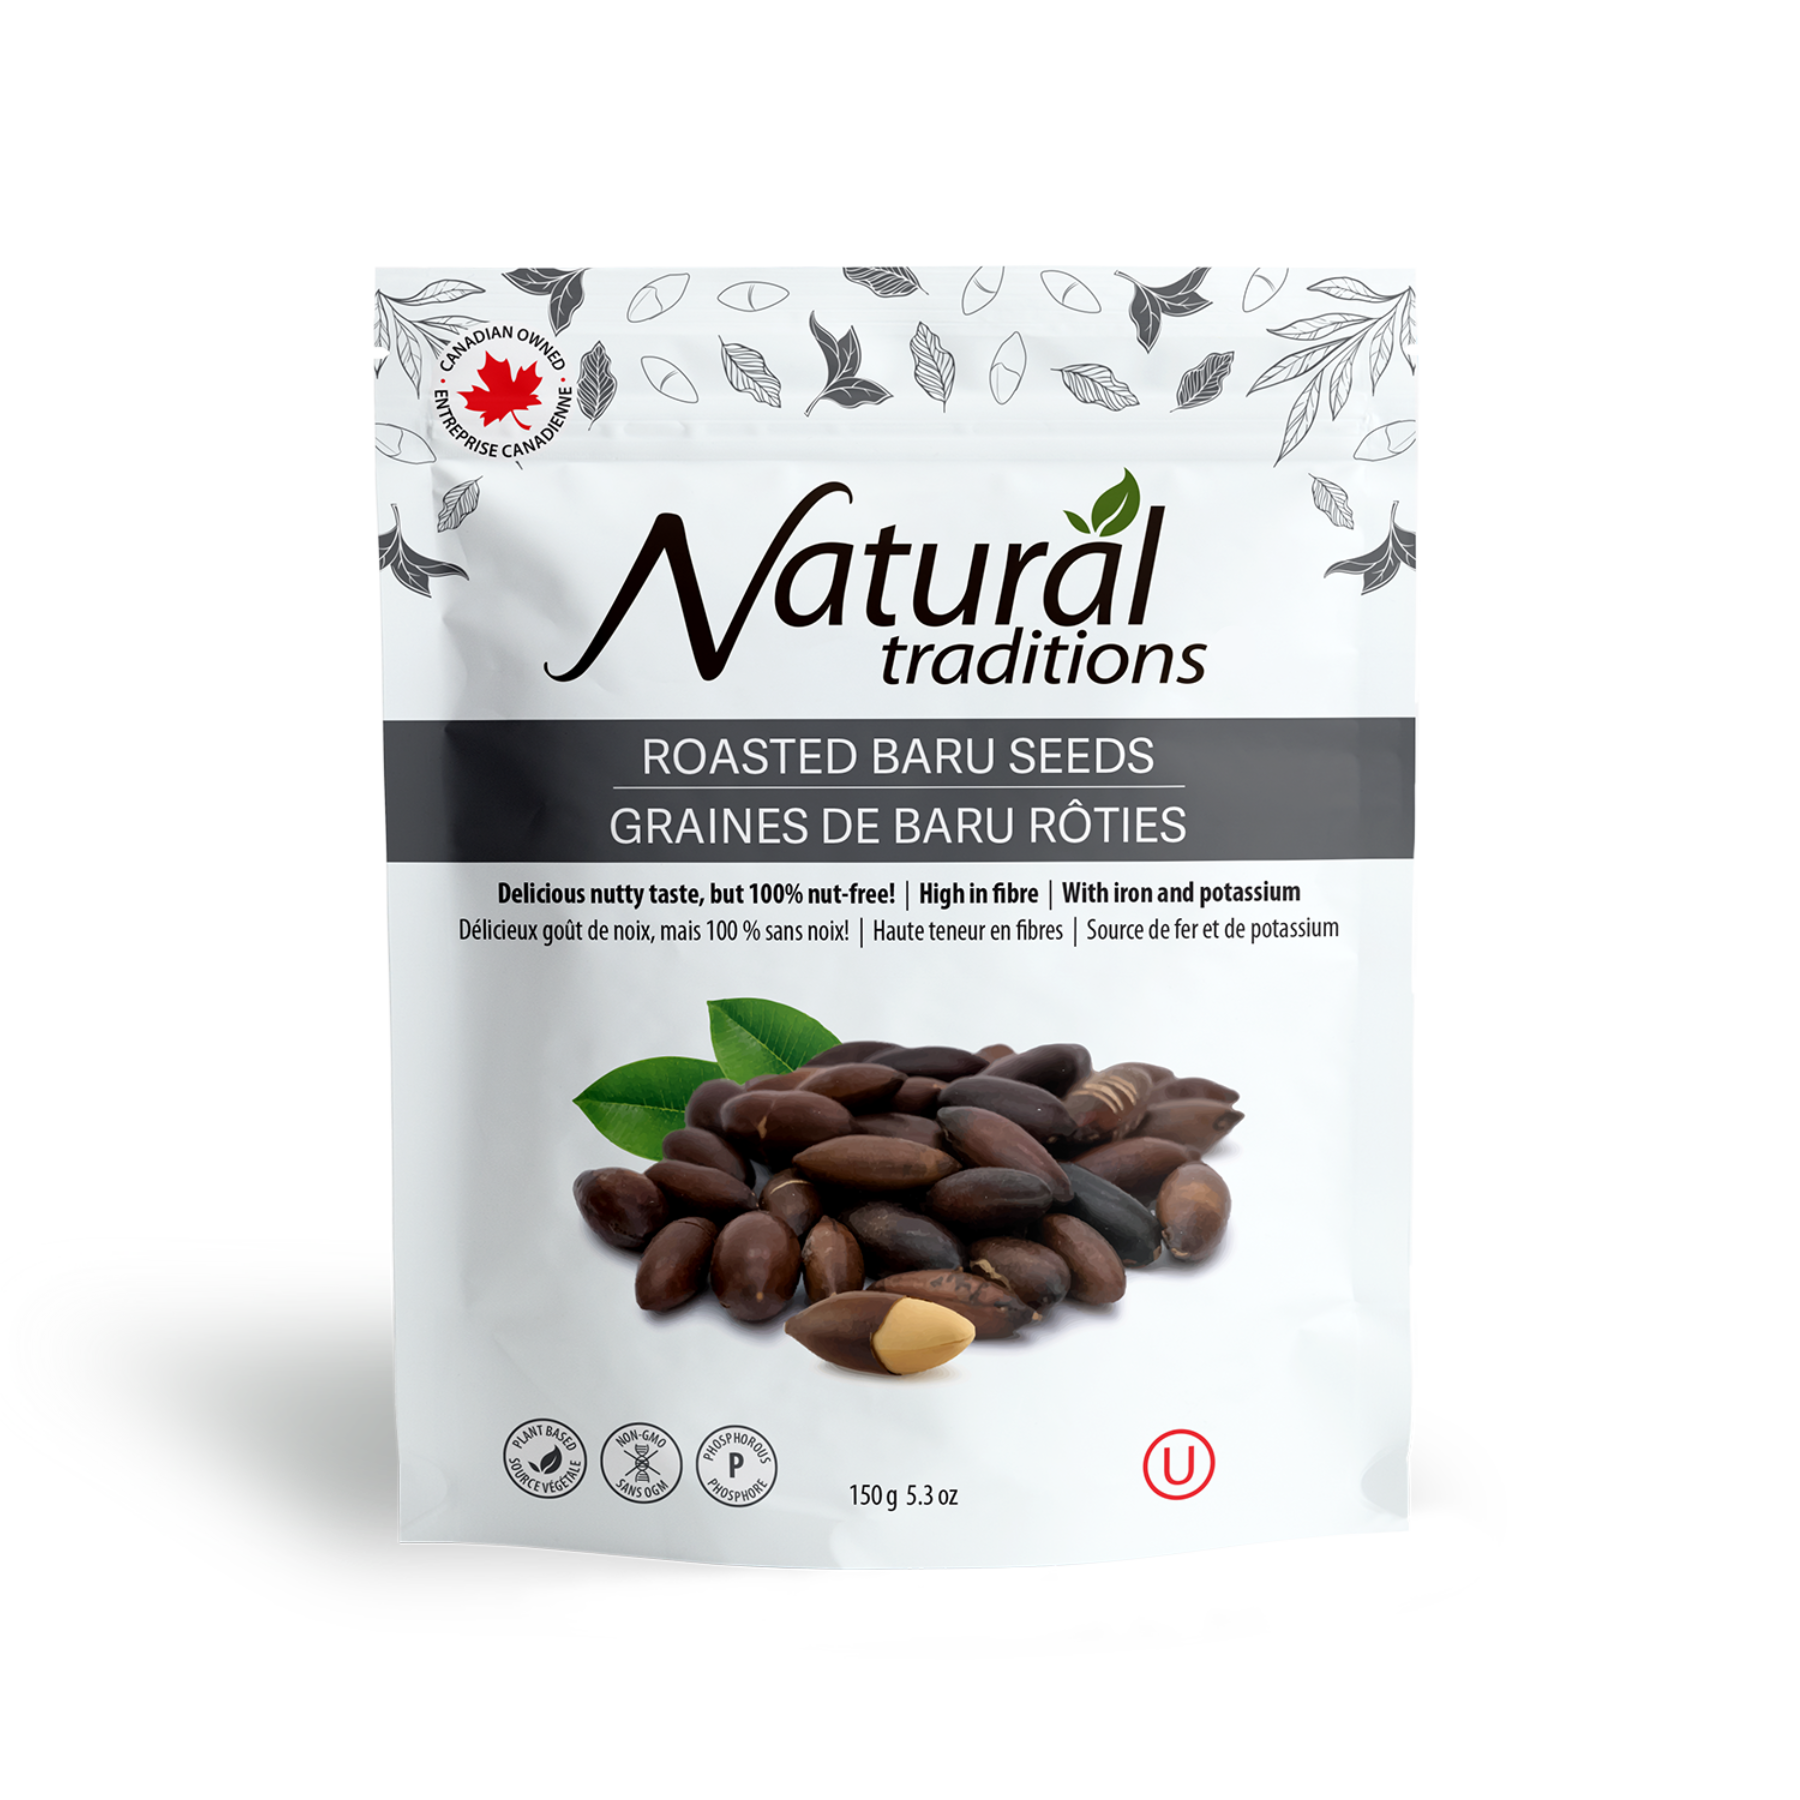 Natural Traditions Roasted Baru Seeds